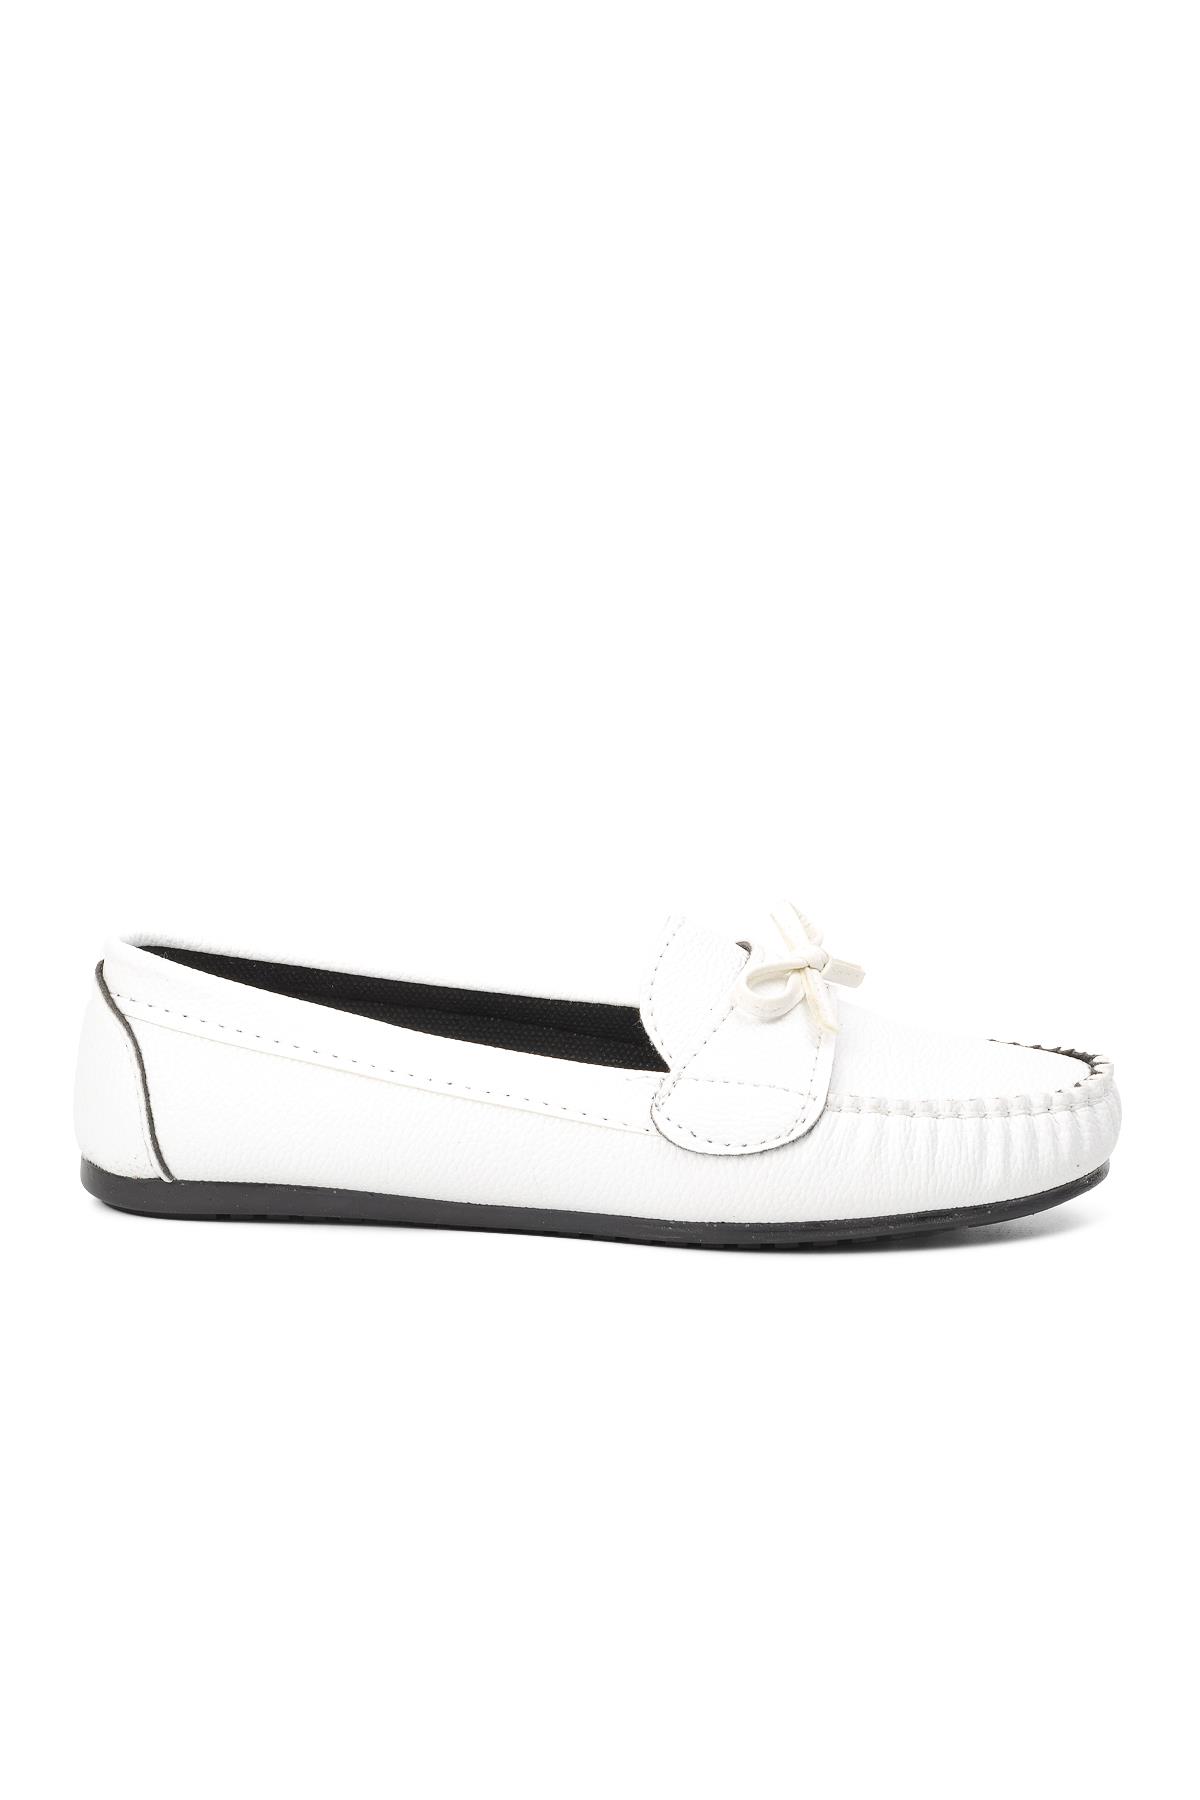  Bestform Women's Casual Value #5006222, White, 38C : Clothing,  Shoes & Jewelry